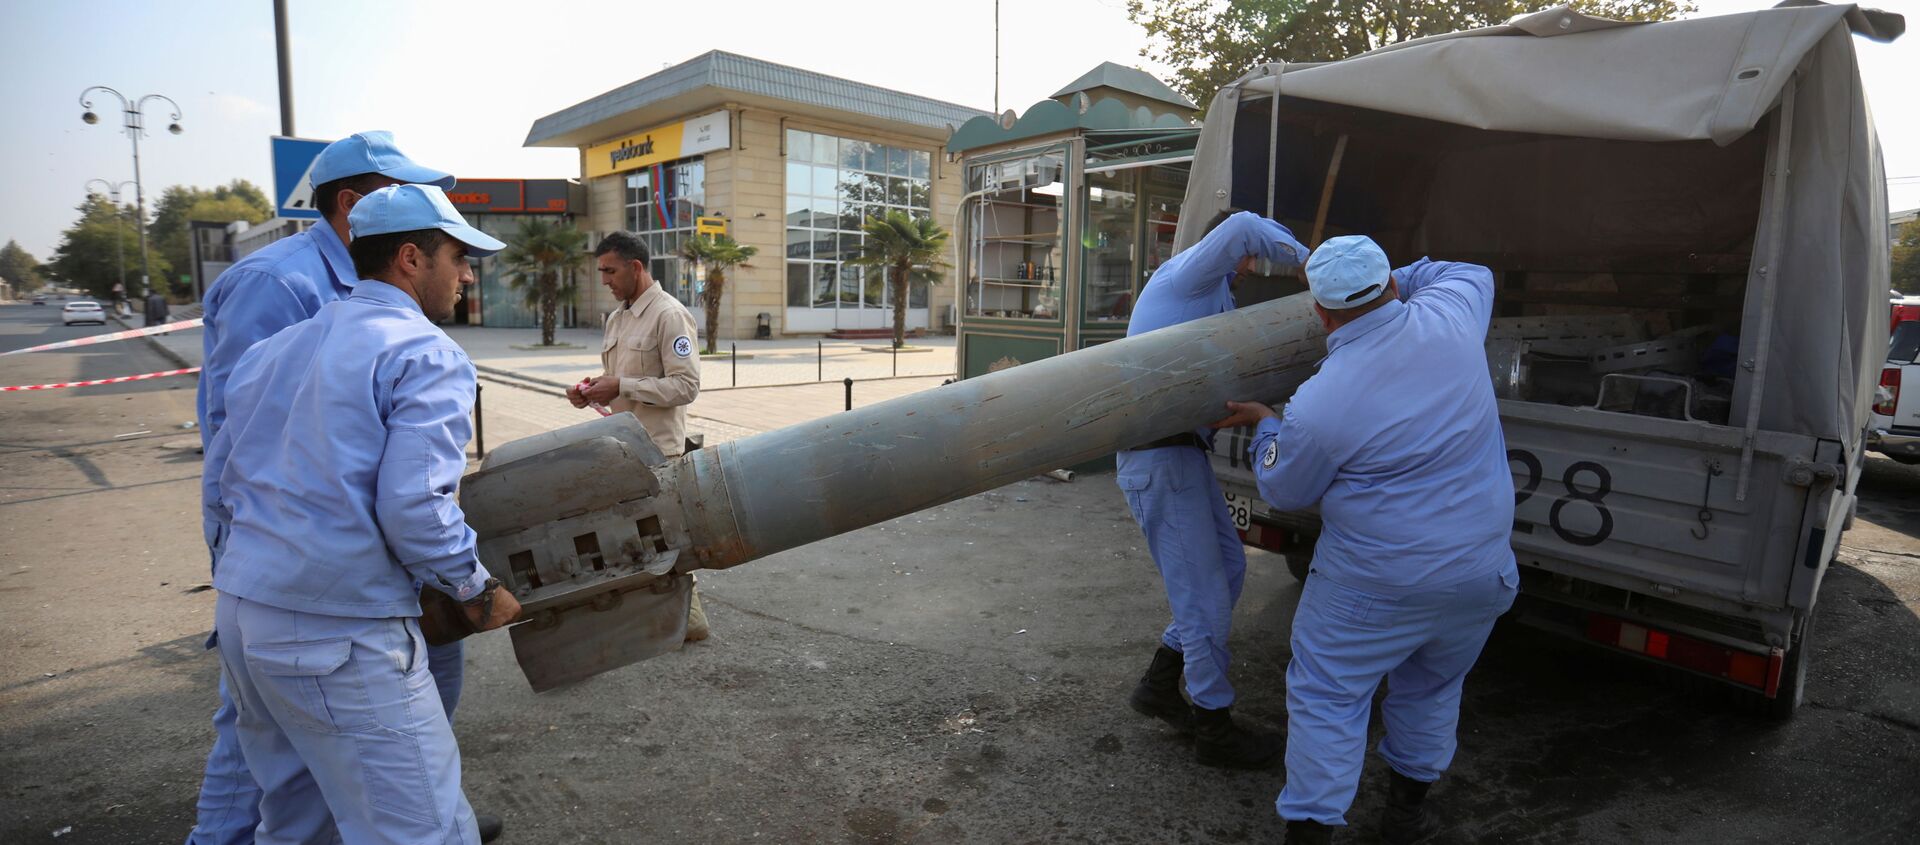 Azeri investigators load a fragment of an artillery shell in a street recently hit by shelling during a military conflict over the breakaway region of Nagorno-Karabakh, in the town of Barda, Azerbaijan October 29, 2020 - Sputnik International, 1920, 11.11.2020